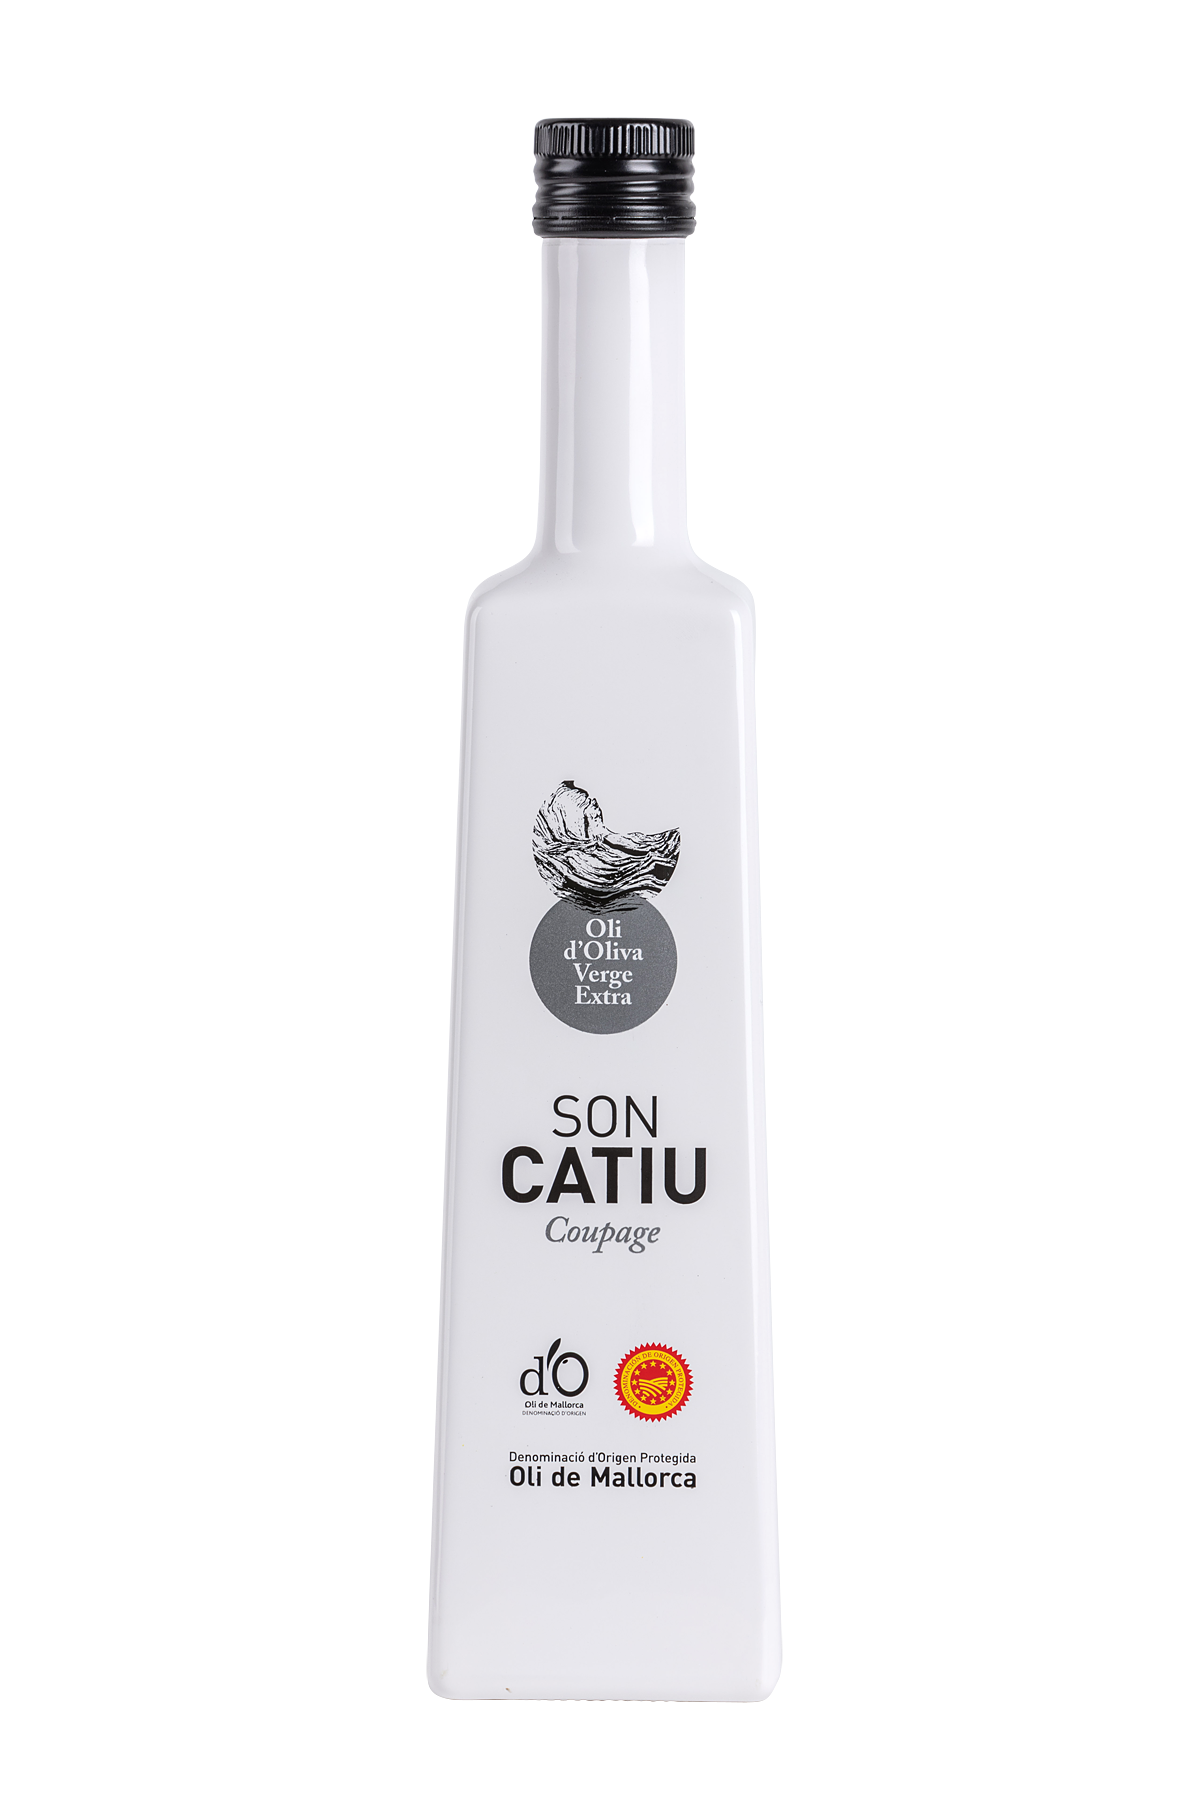 OOVE DO SON CATIU 50CL COUPAGE